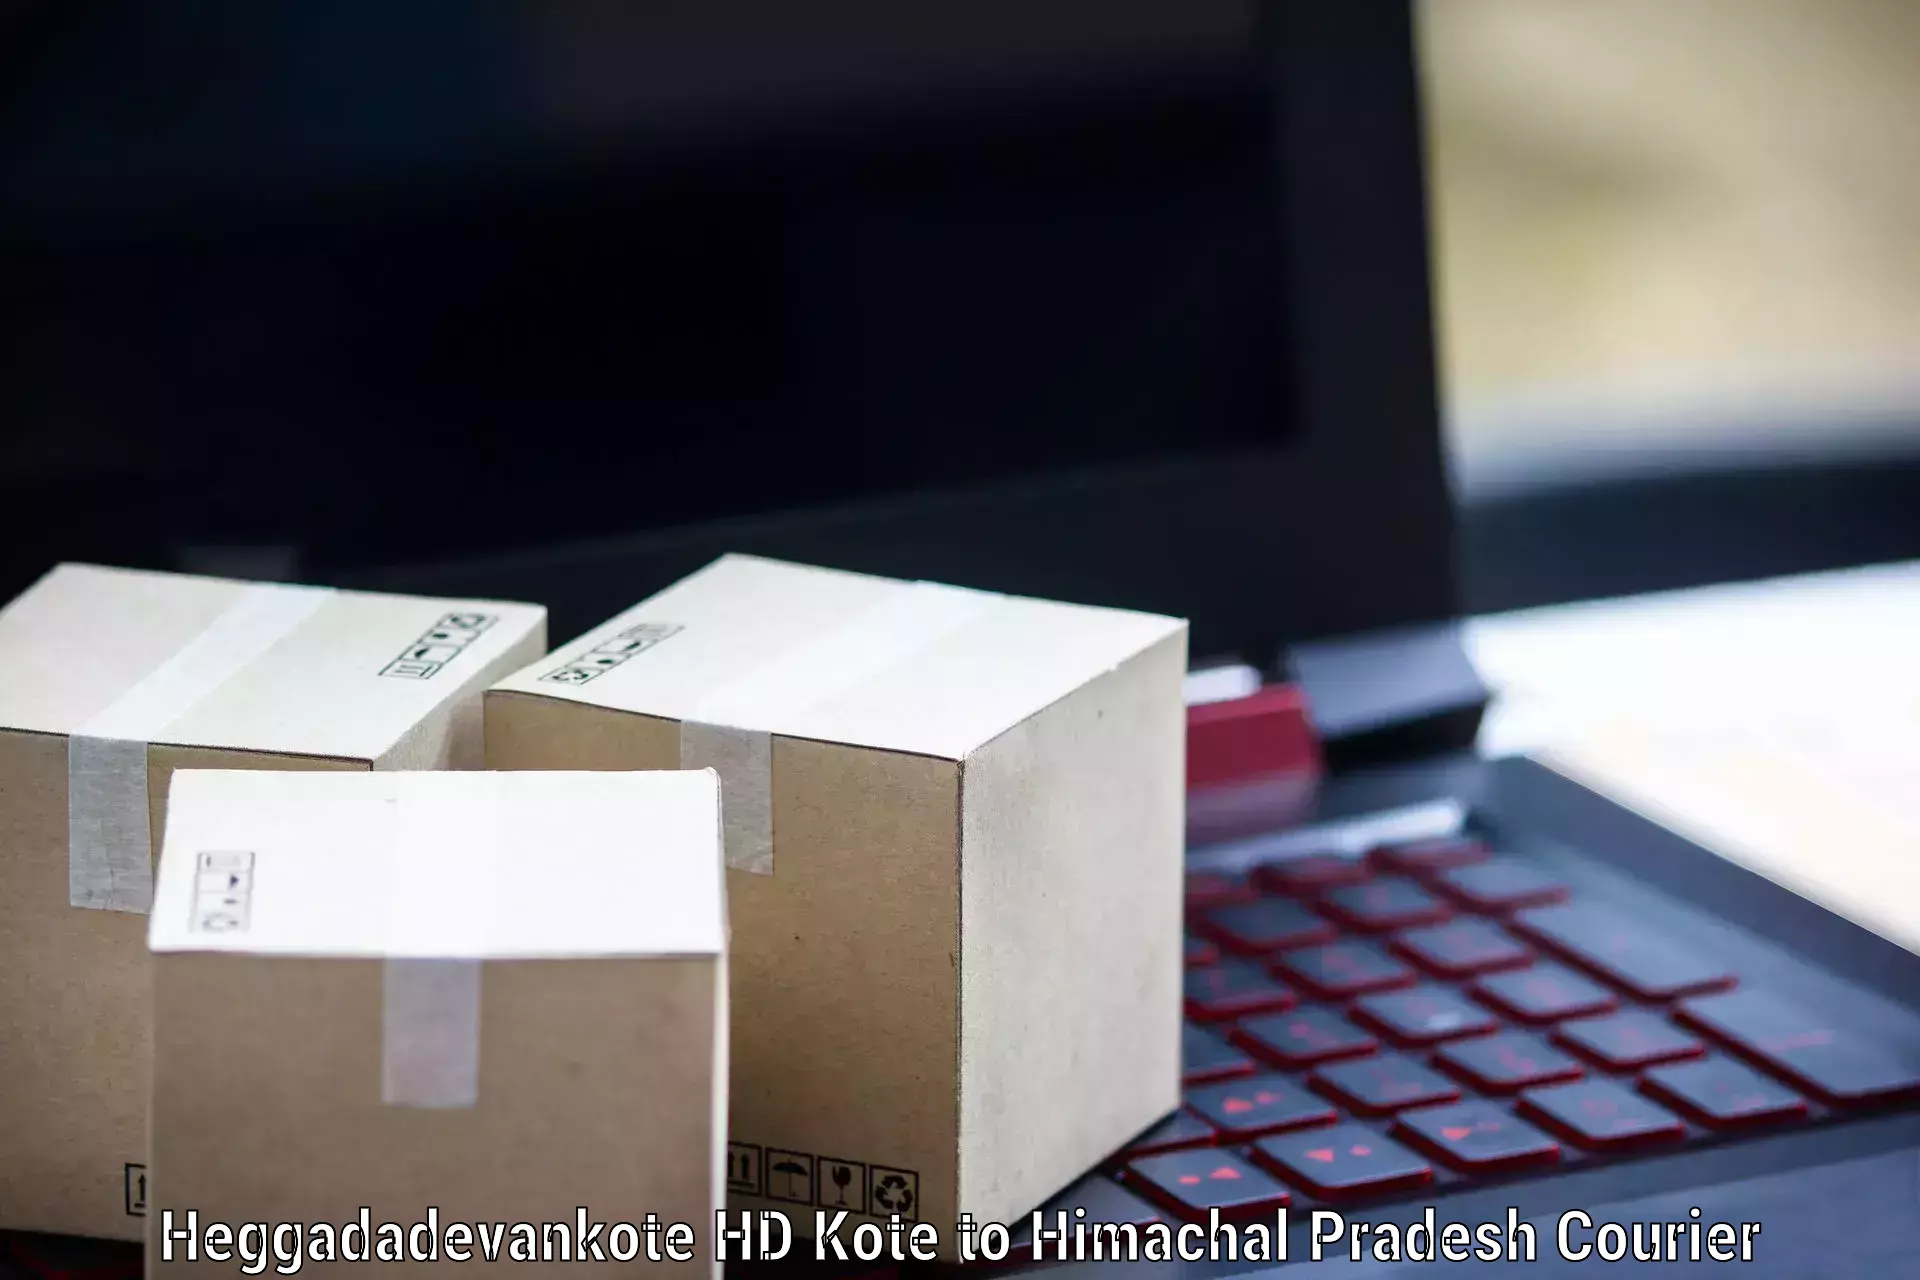 Package delivery network Heggadadevankote HD Kote to Tauni Devi